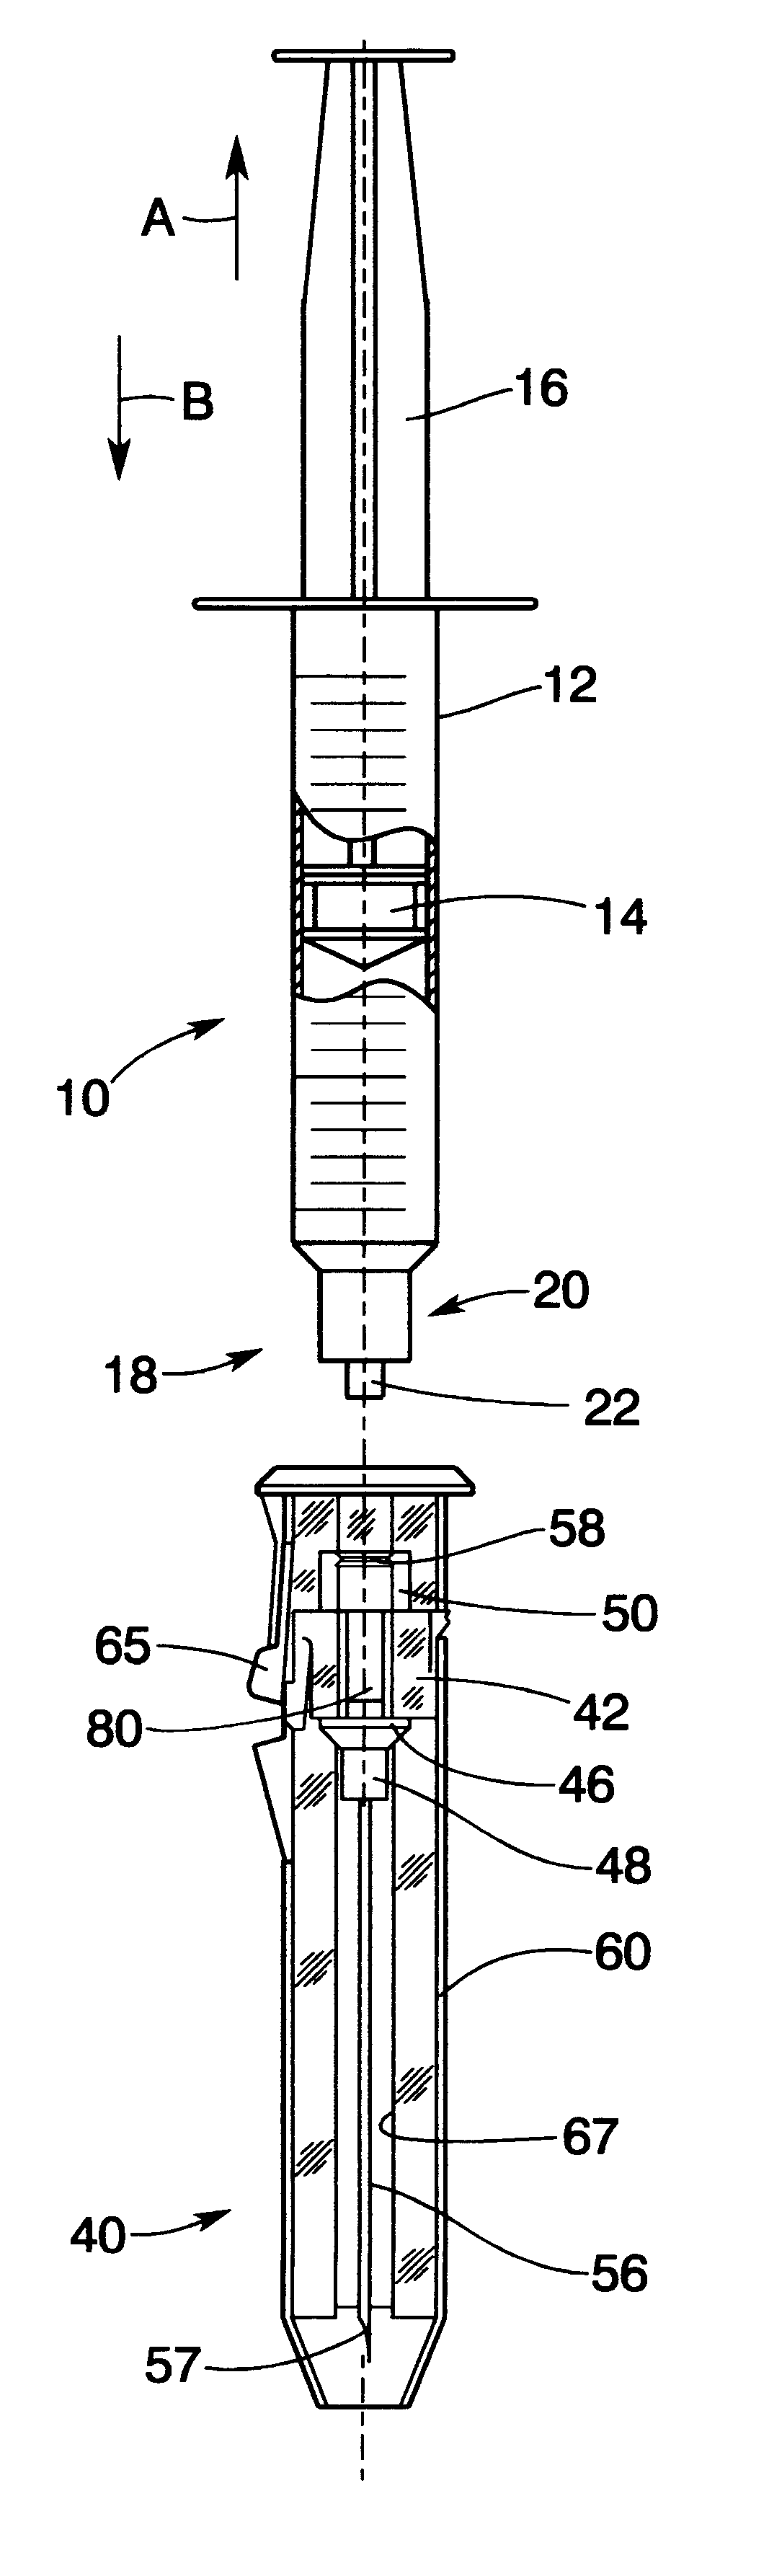 Selectively lockable needle guard